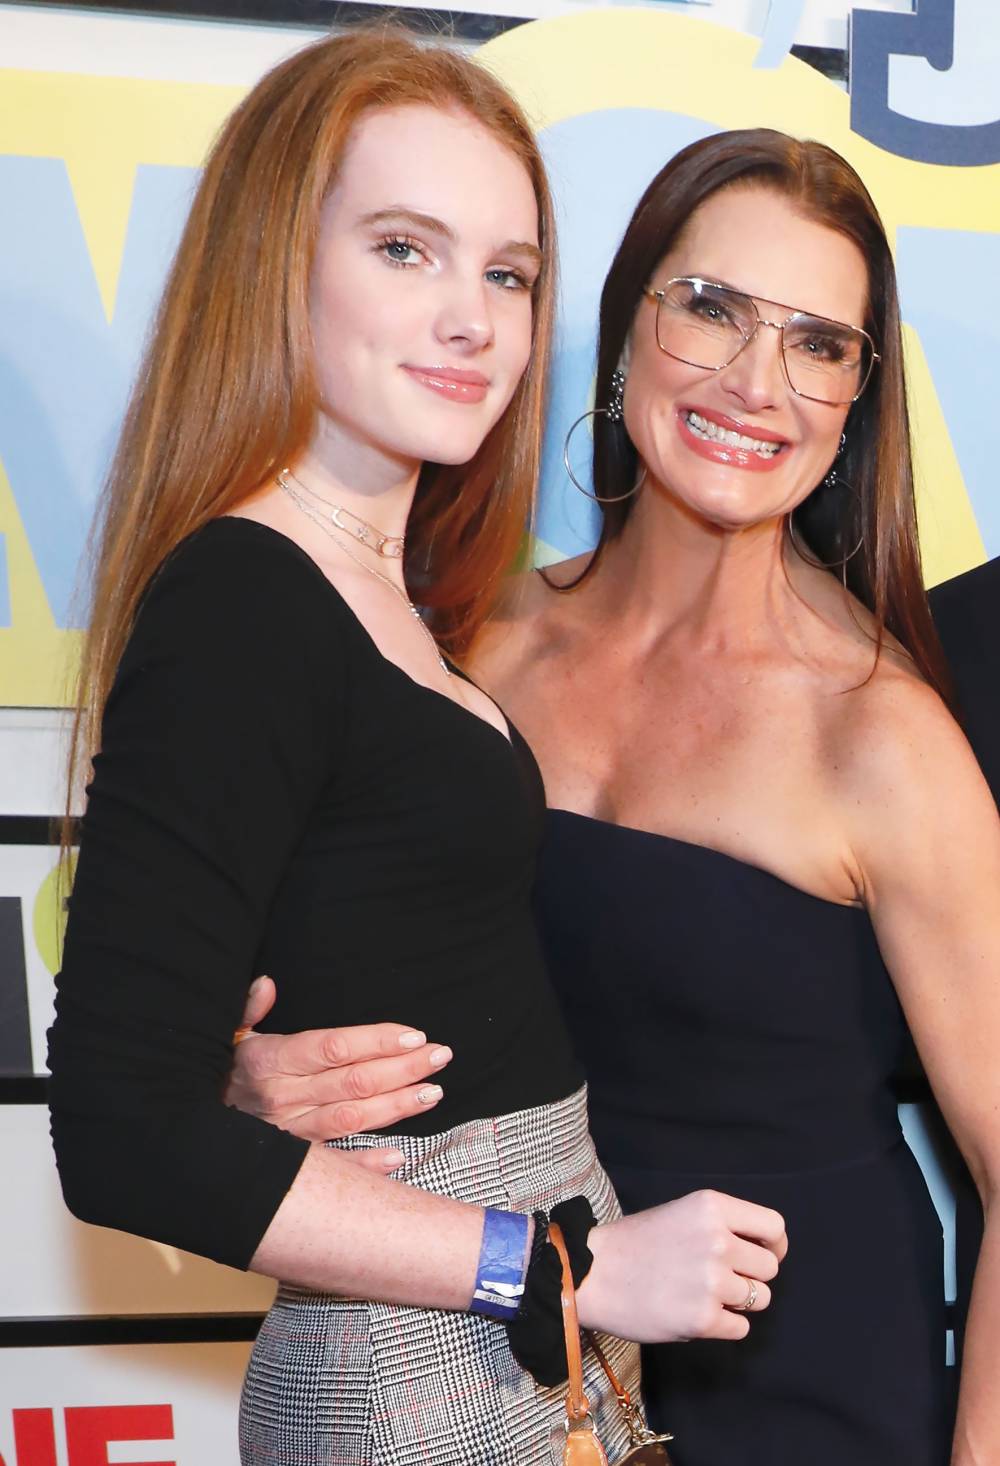 Brooke Shields’ Daughter Rowan Hits Her in the Face With Purse for TikTok: ‘A--hole Move’